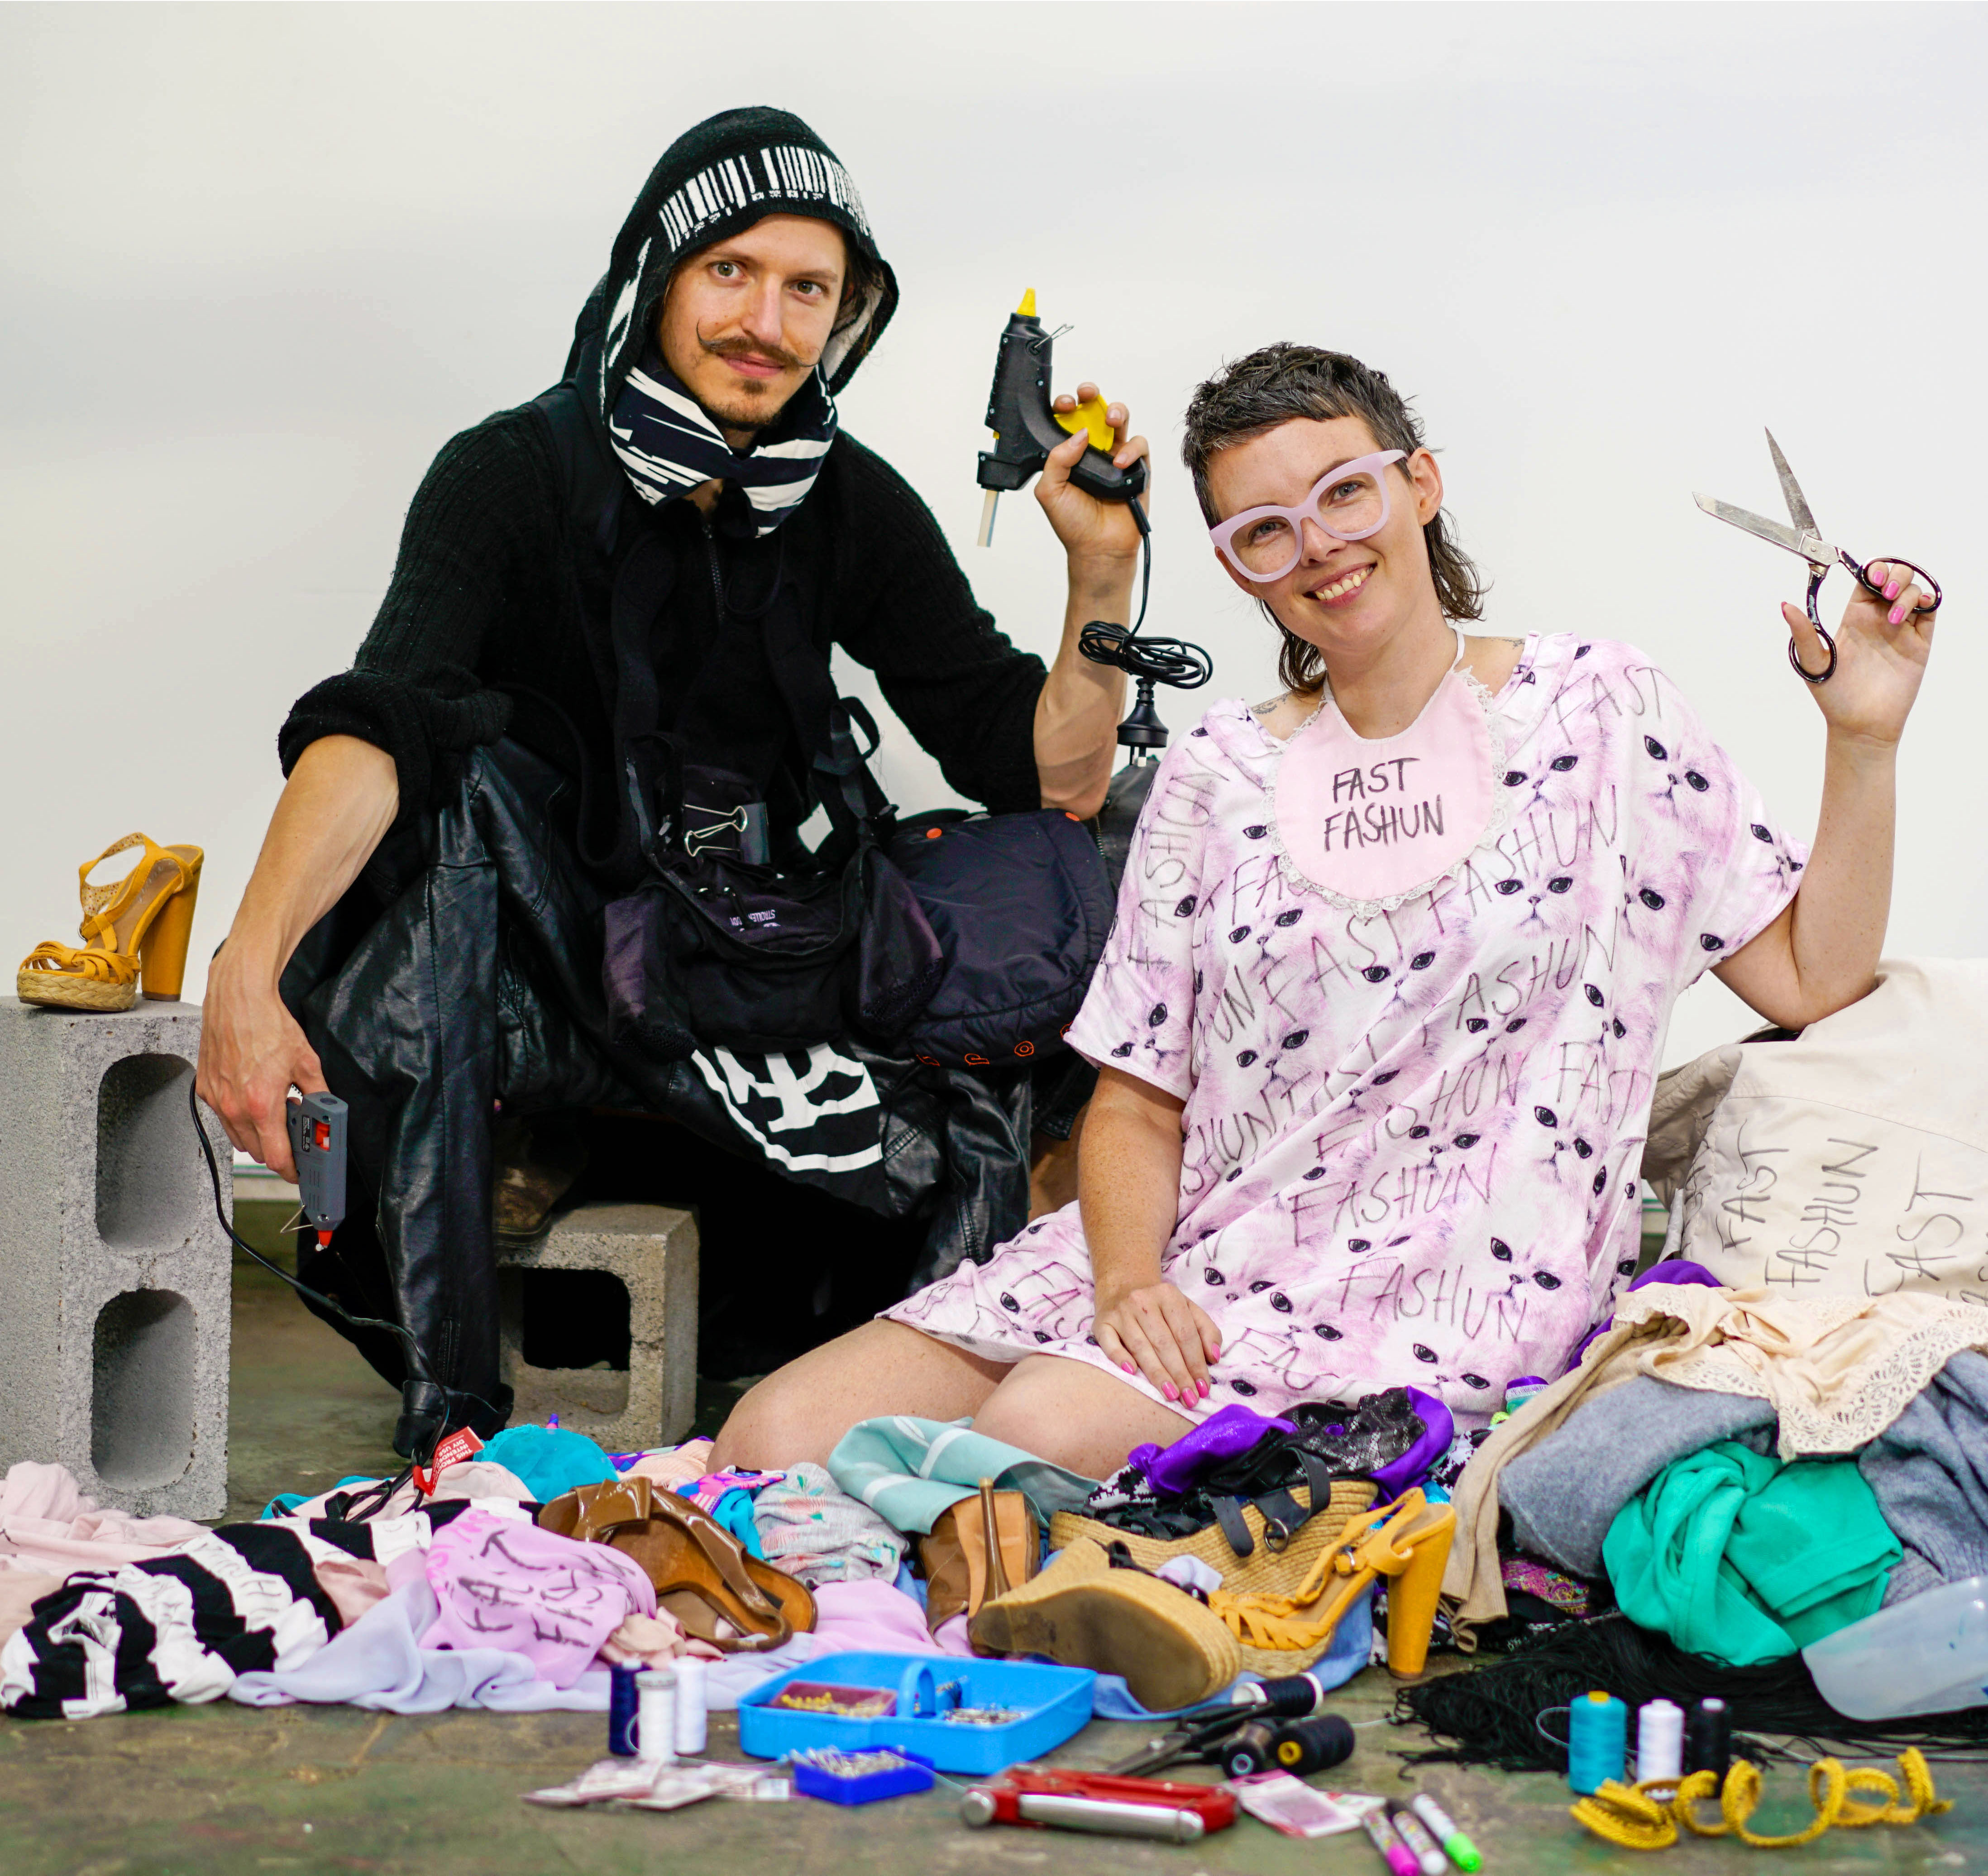 Fast Fashun artists posing with scissors and glue gun with a pile of fashion waste